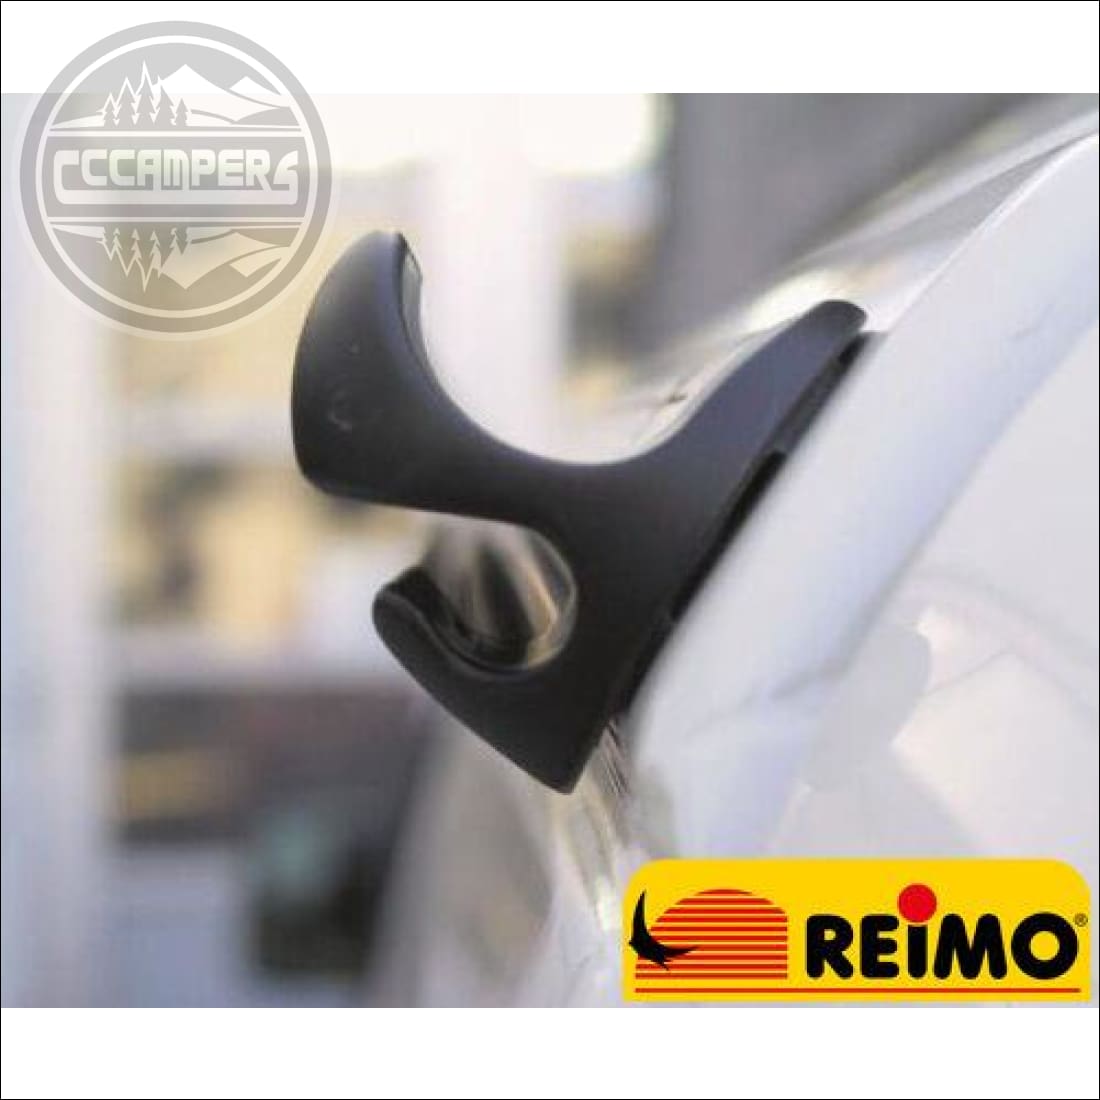 Reimo Multirail Rubber and plastic end set for Multirail - UK Multi-Rail Multi Rail - cccampers.myshopify.com